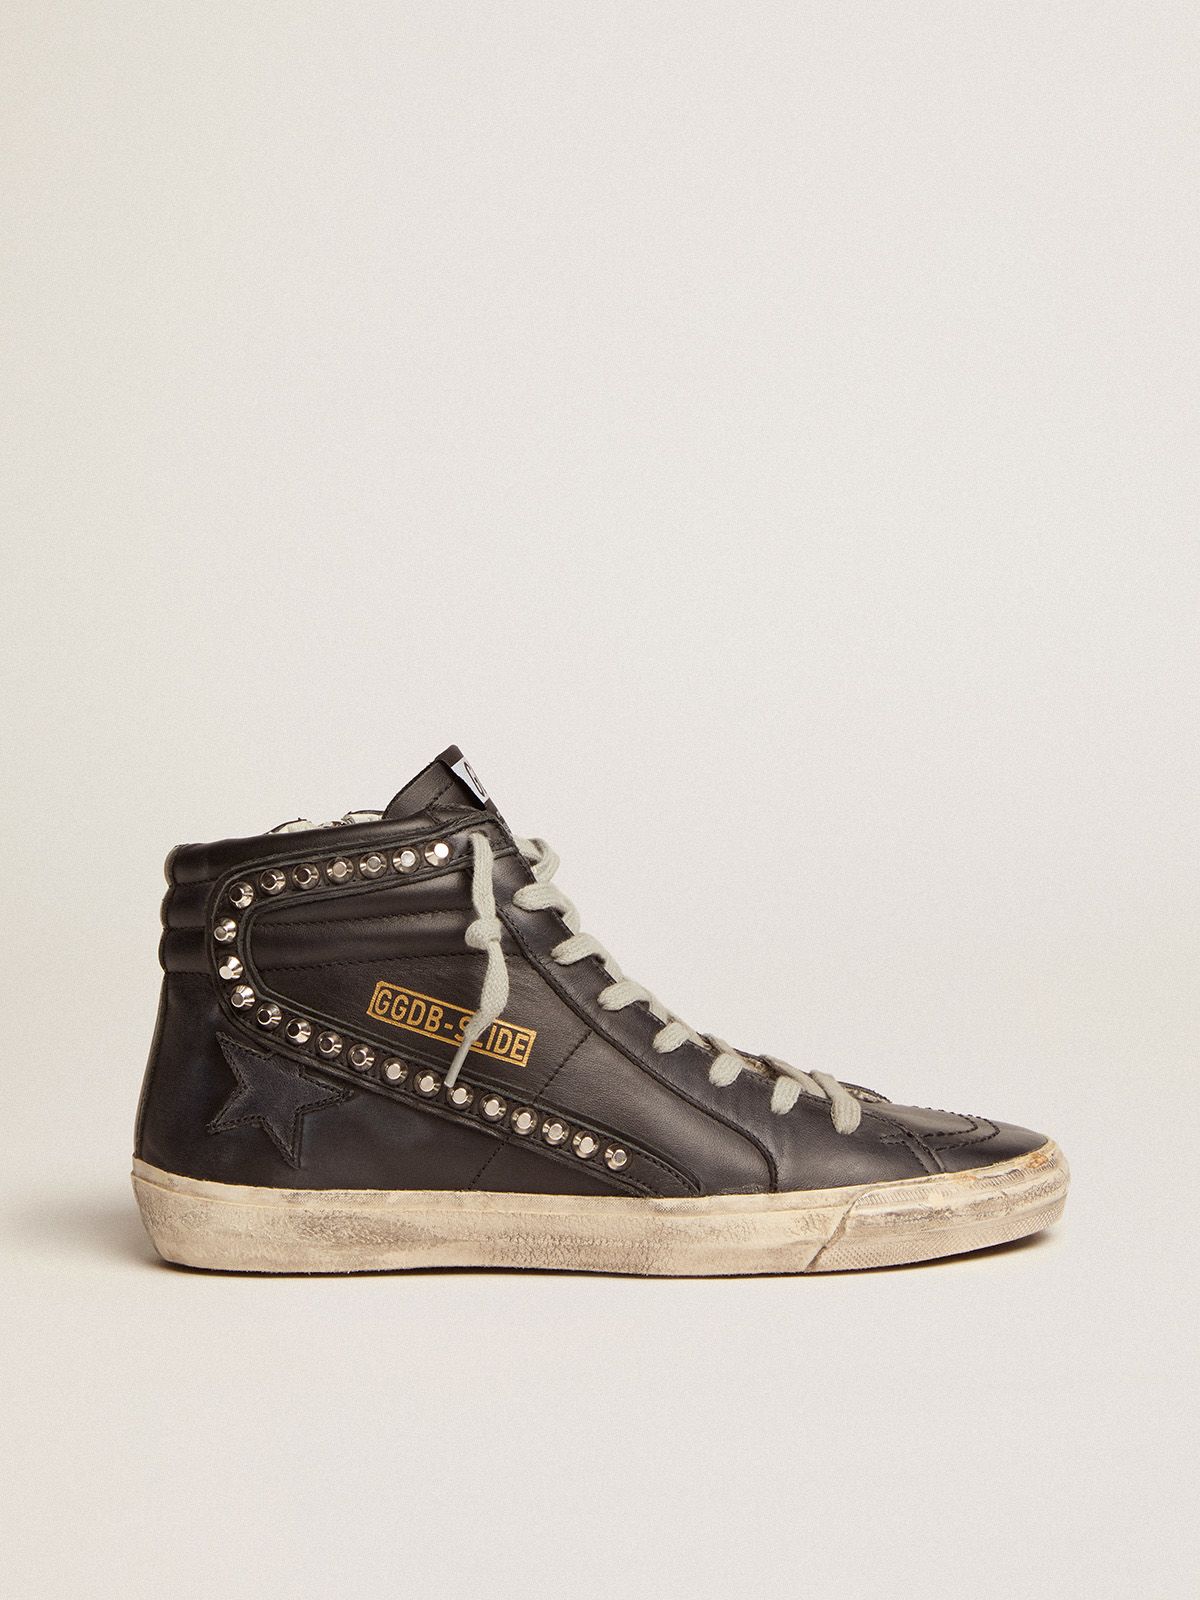 Golden Goose Bambina Slide sneakers in metal studded leather